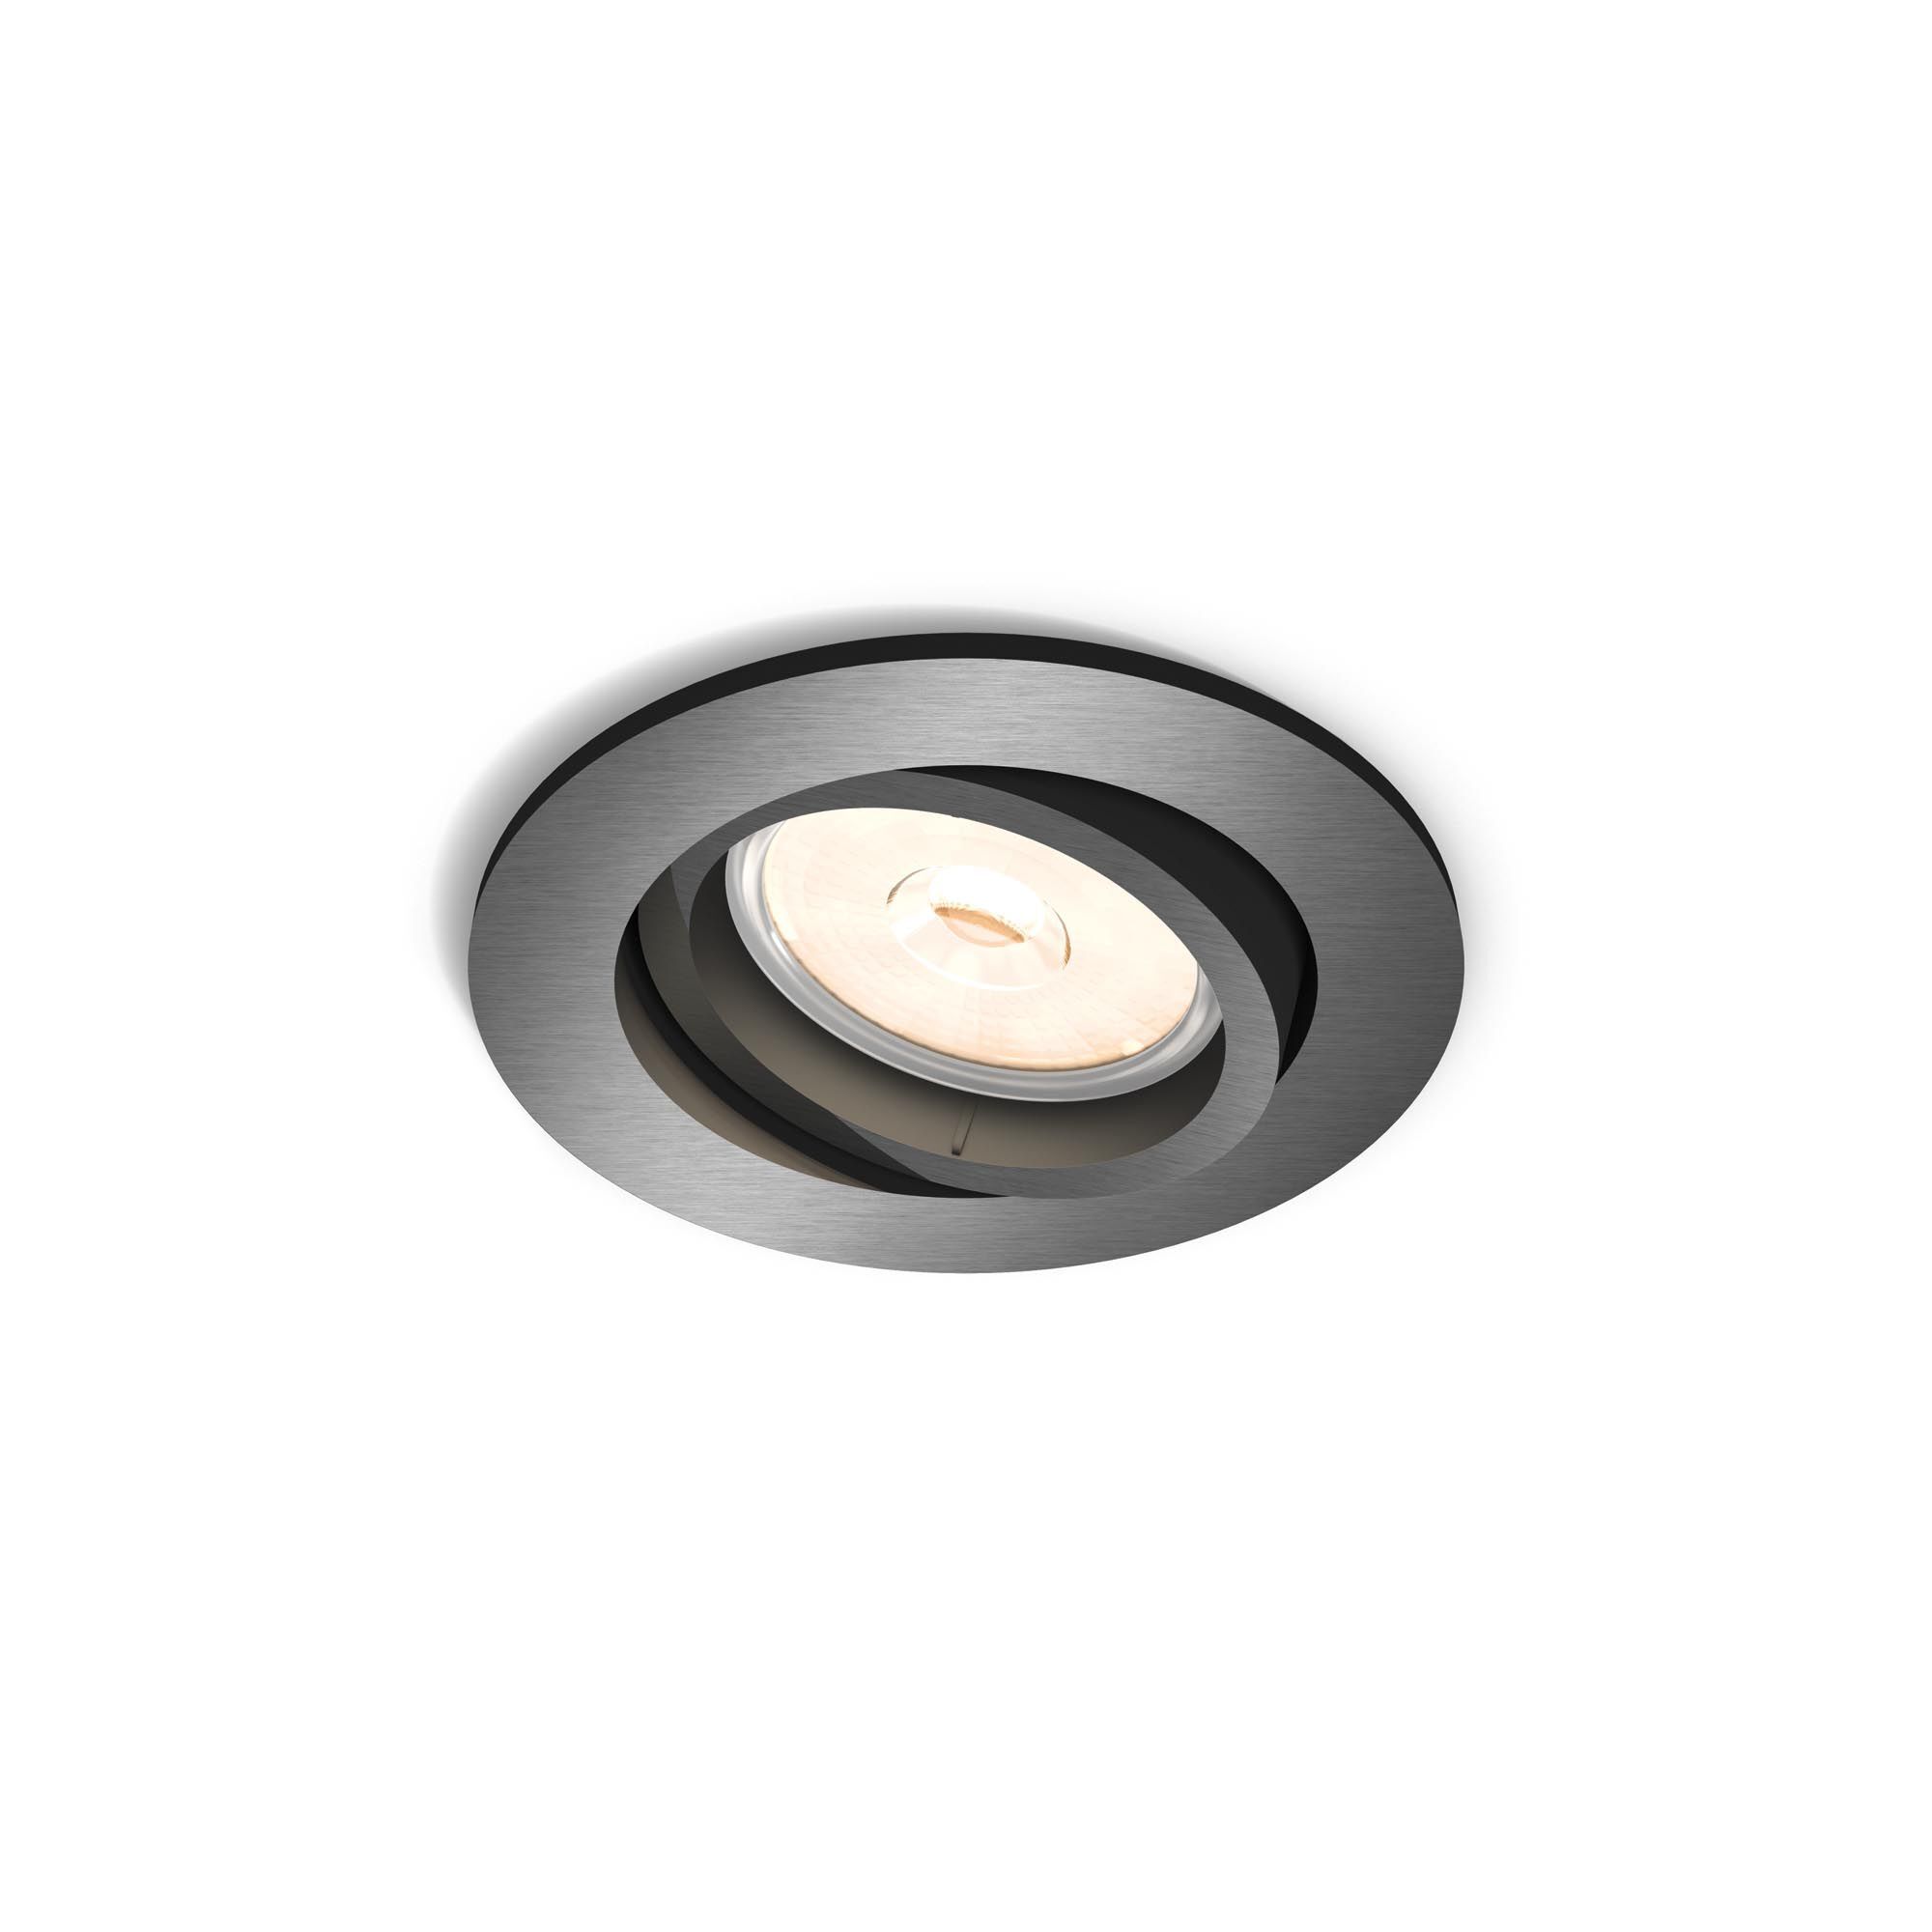 Philips myLiving DONEGAL grey LED Recessed spot light